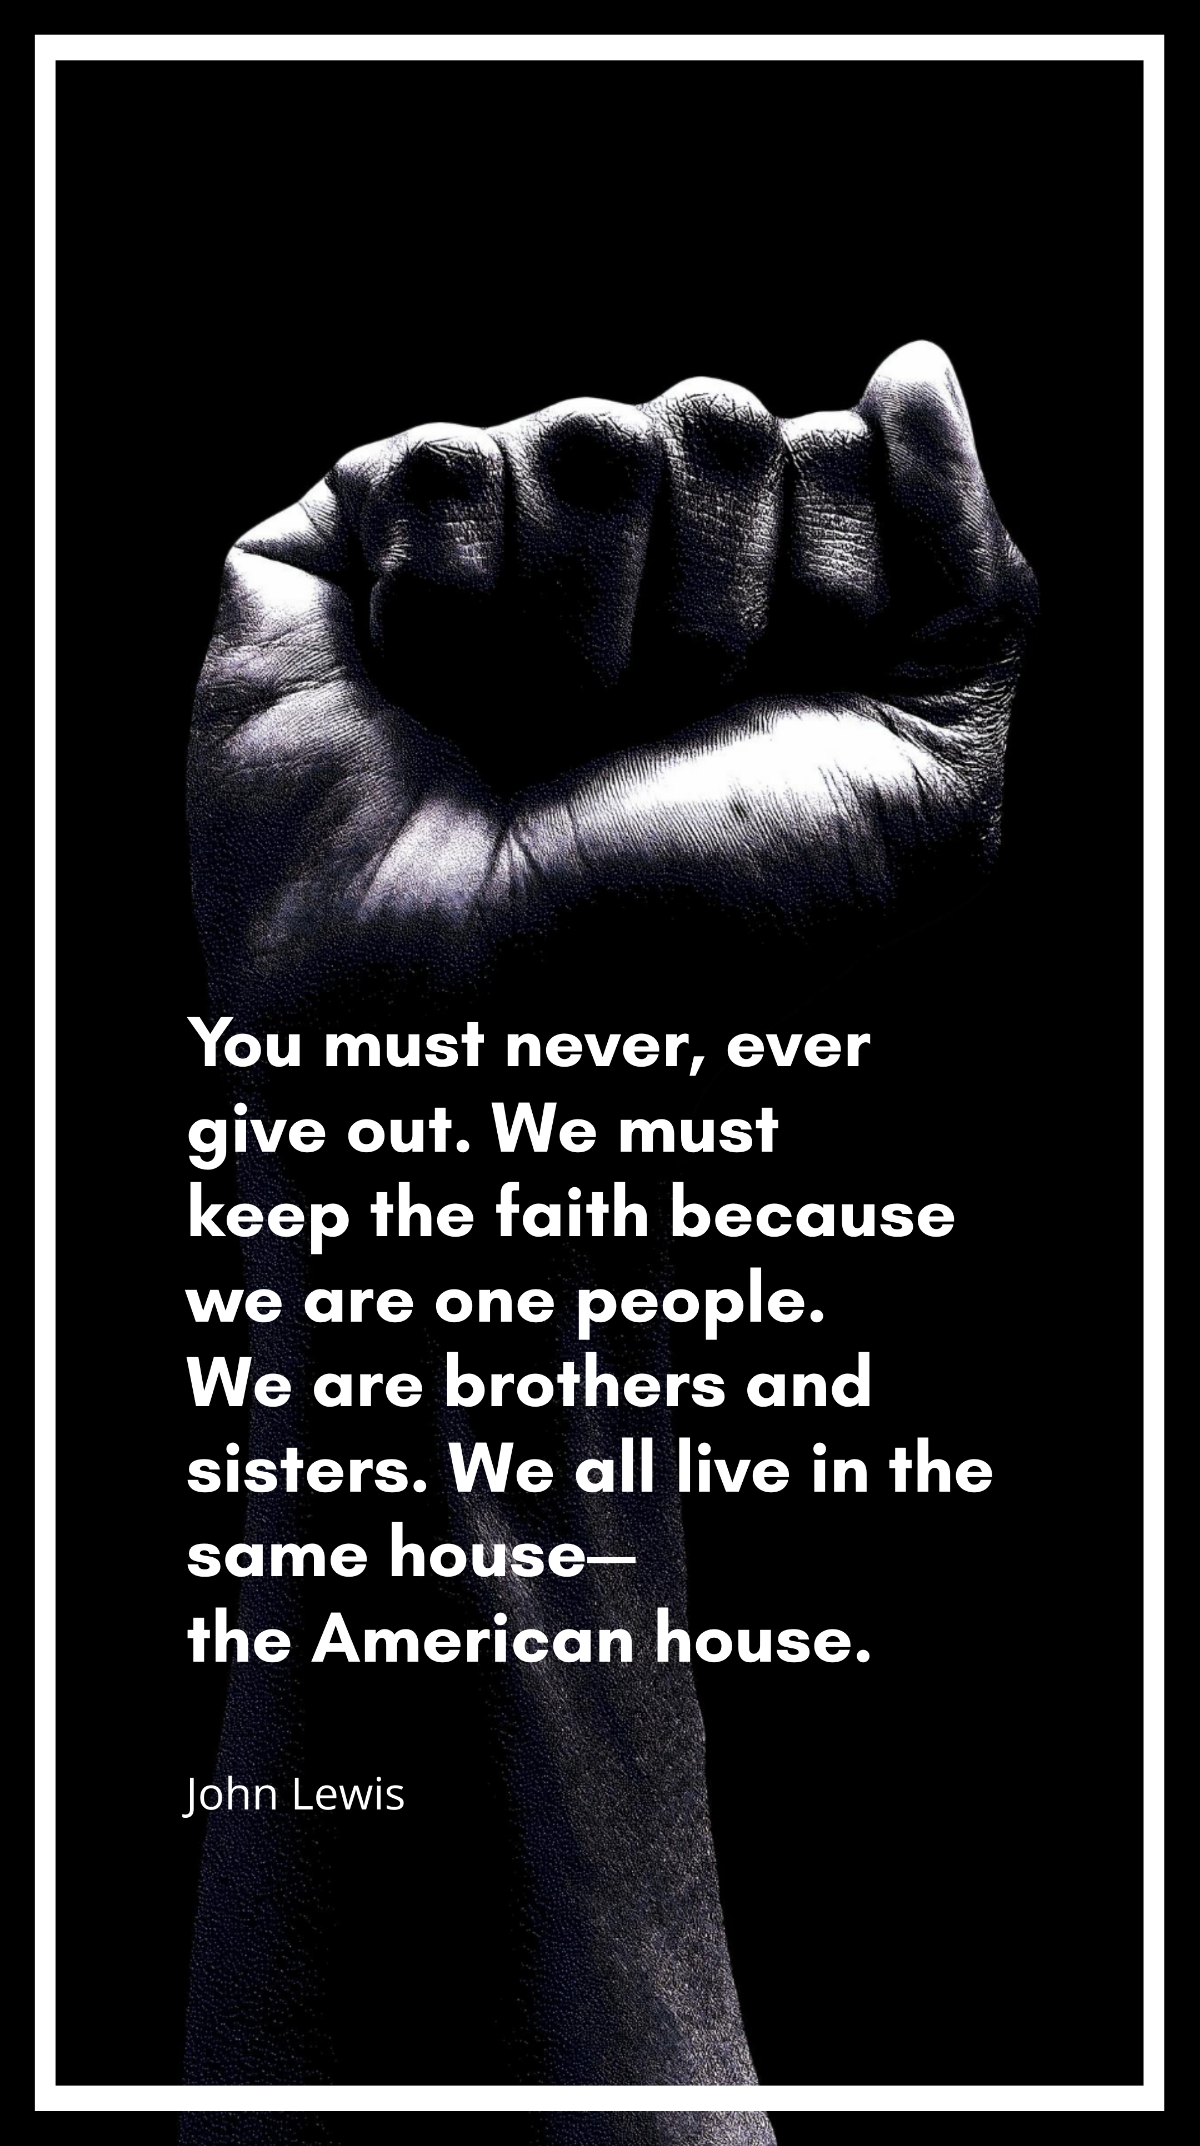 John Lewis - You must never, ever give out. We must keep the faith because we are one people. We are brothers and sisters. We all live in the same house—the American house. Template